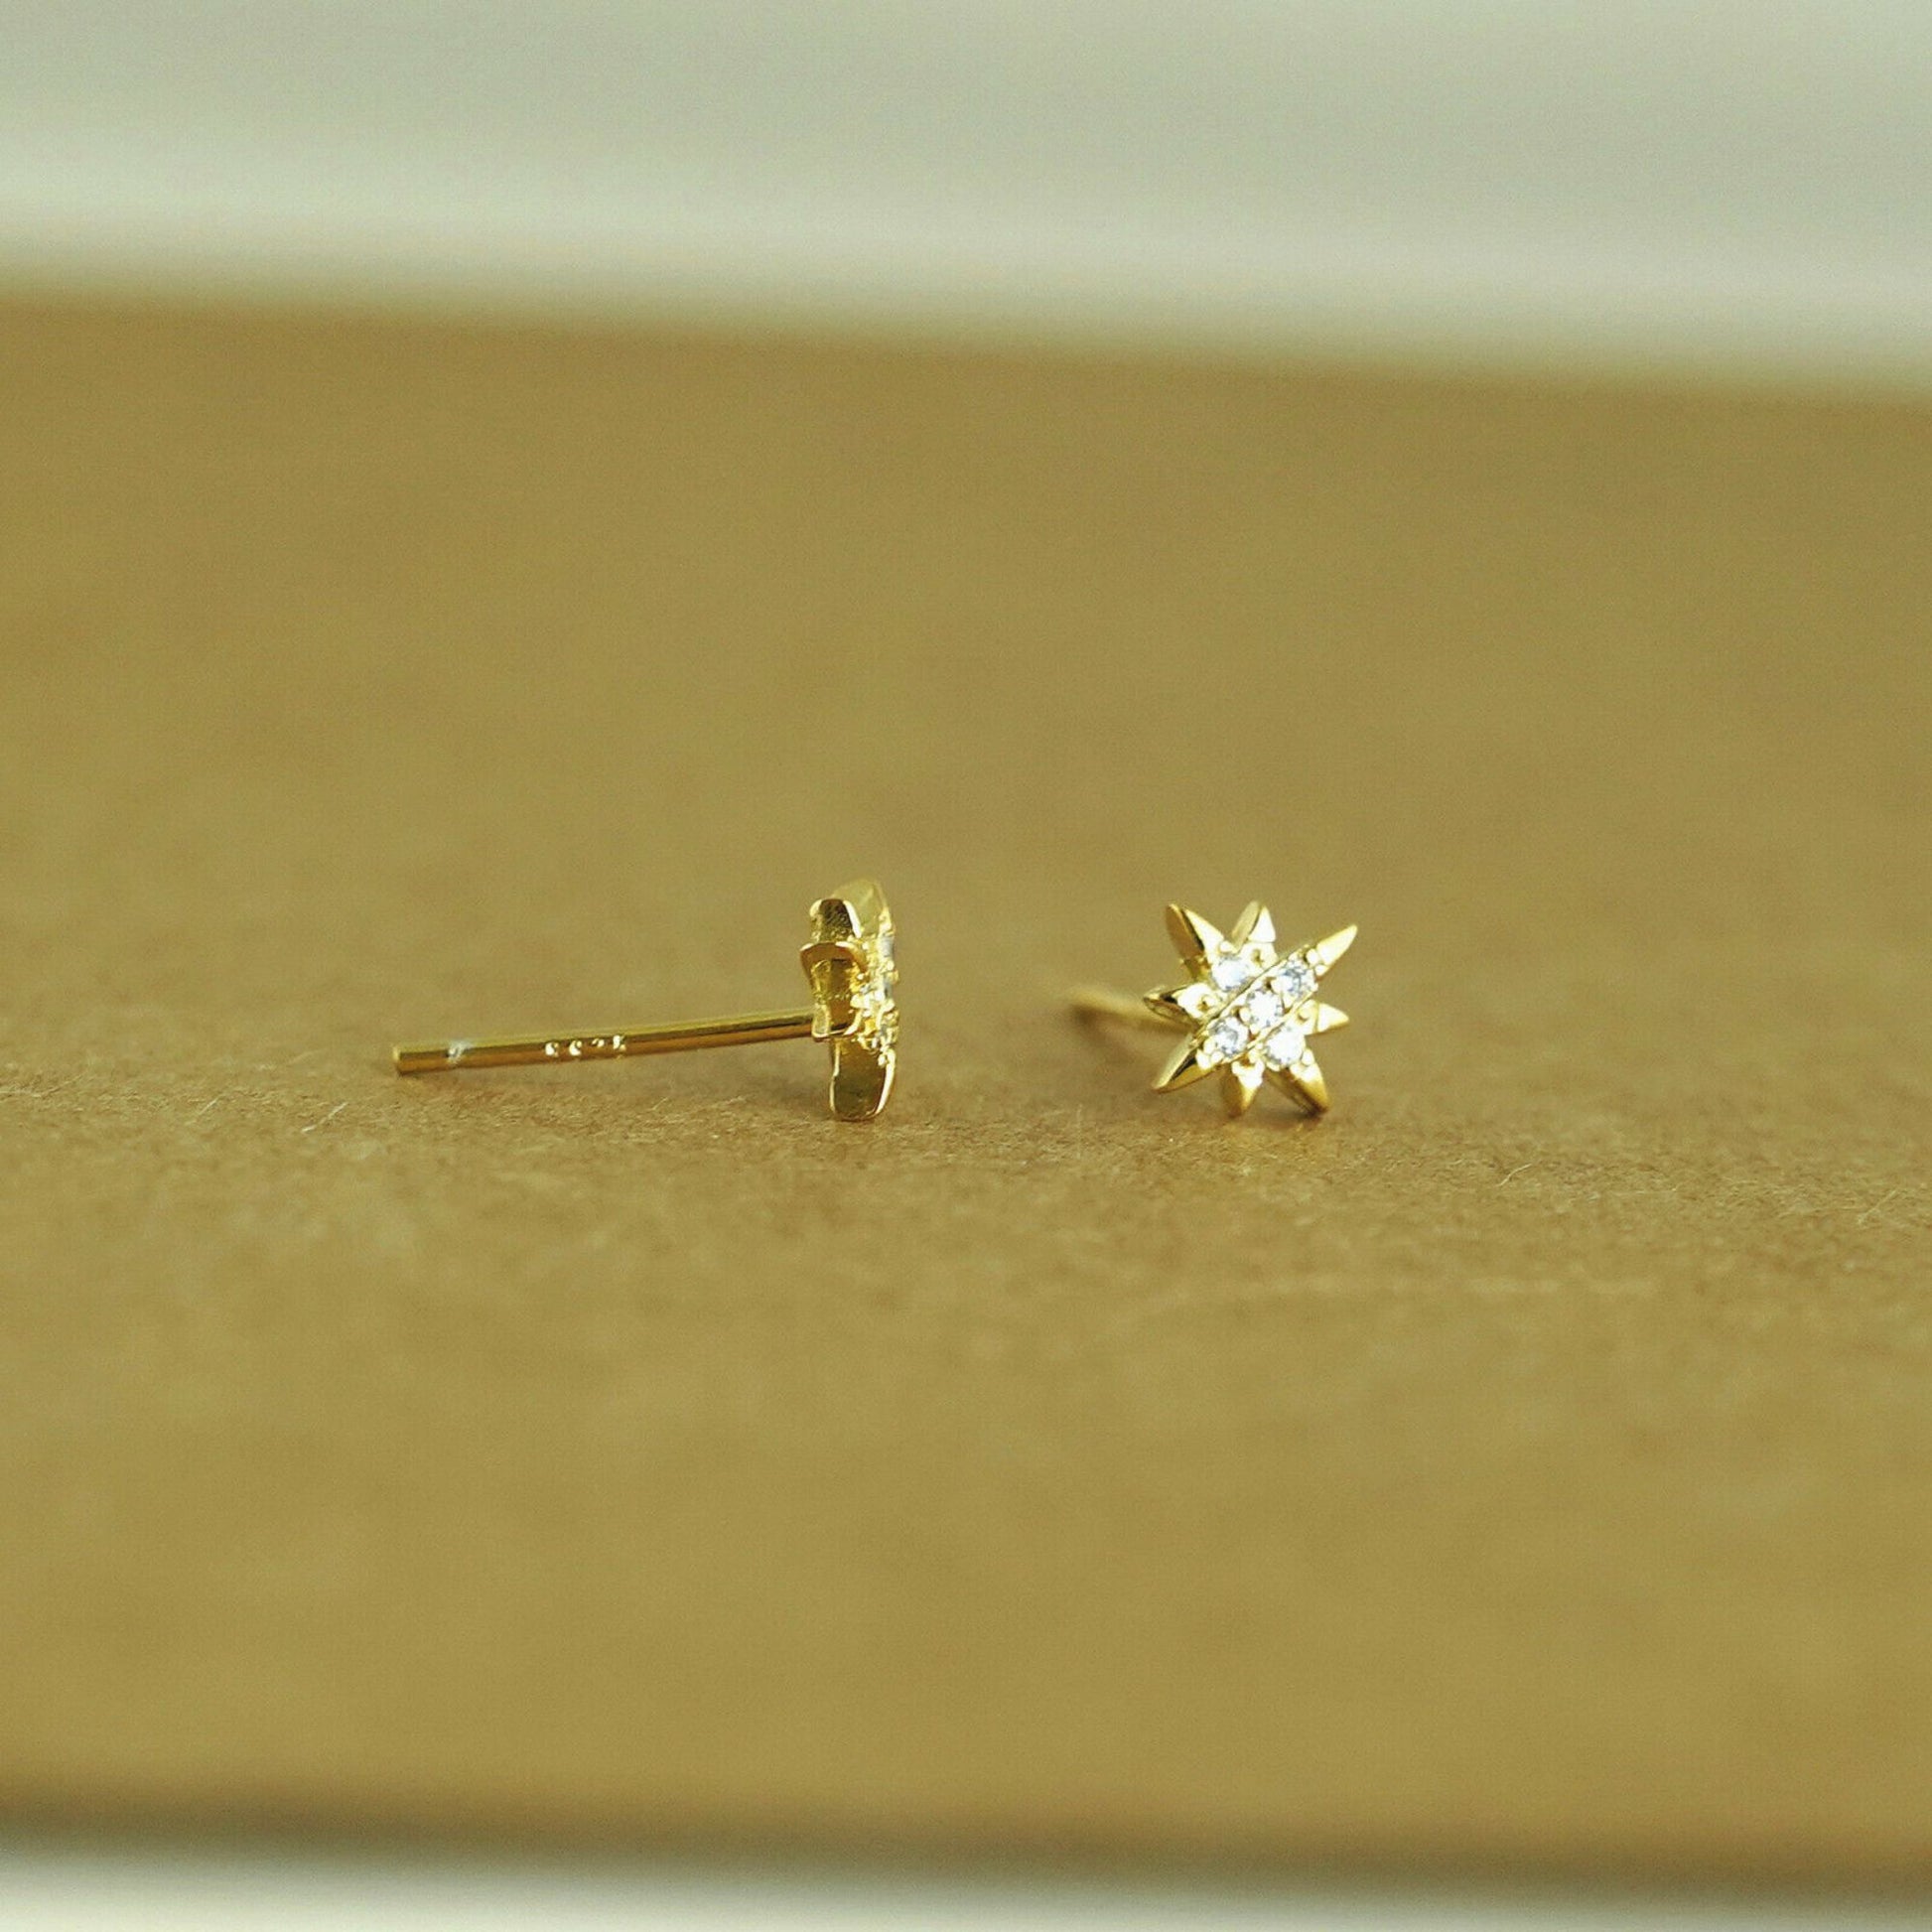 Star Stud Earrings in 18K Gold Plated Sterling Silver with CZ North Pole Design - sugarkittenlondon